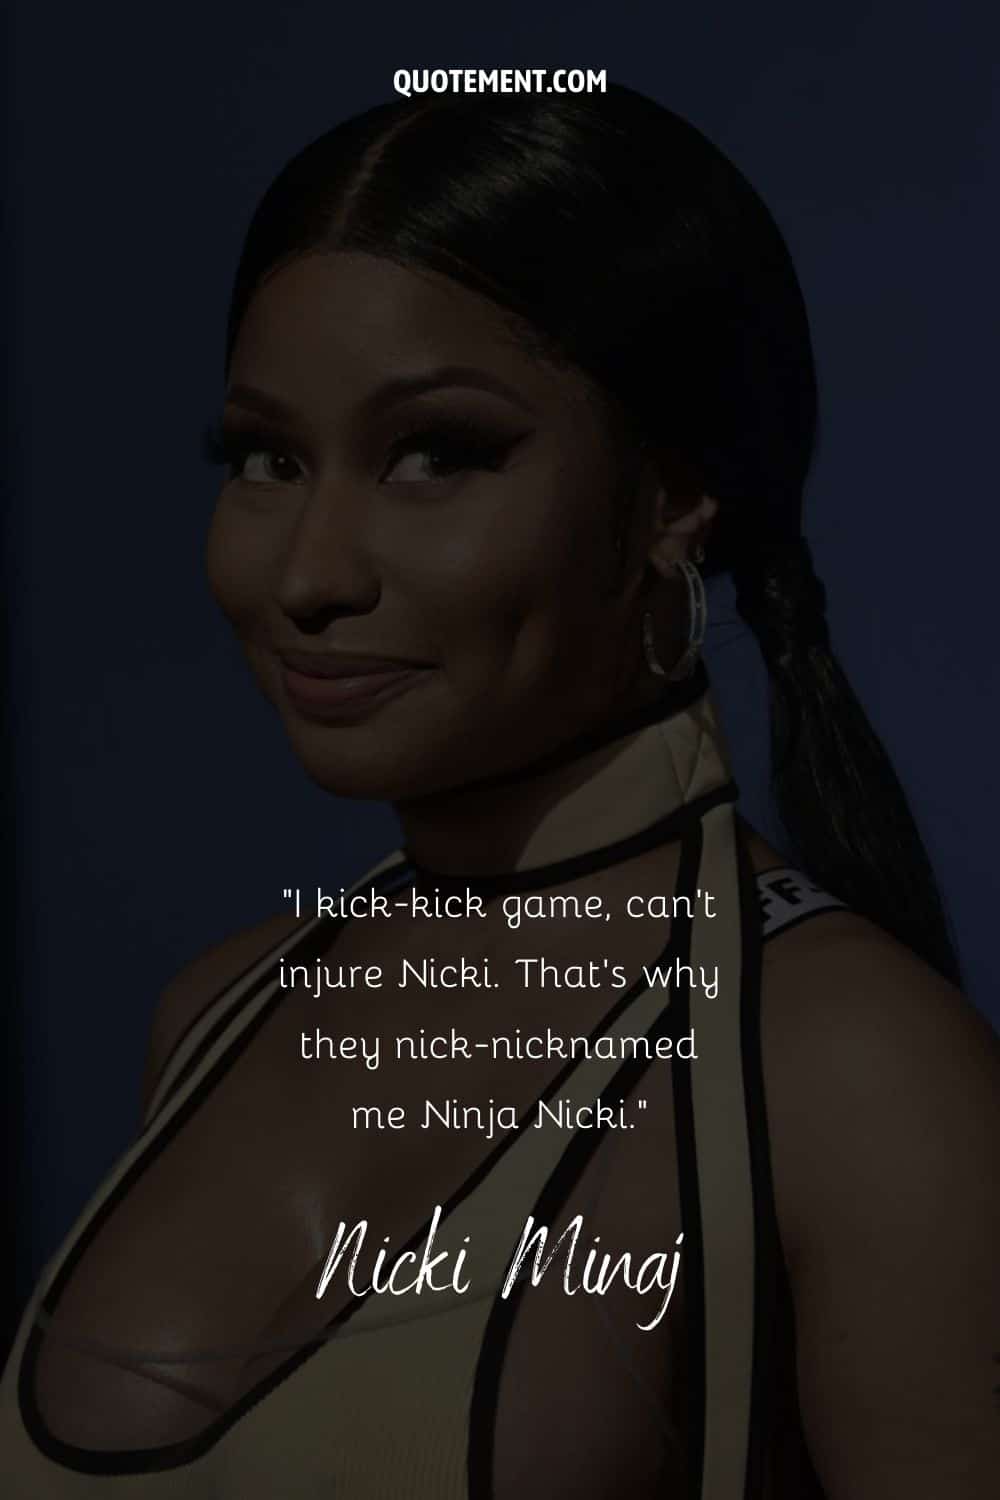 Funny quote by Nicki Minaj mentioning her nickname, and her portrait in the background as well